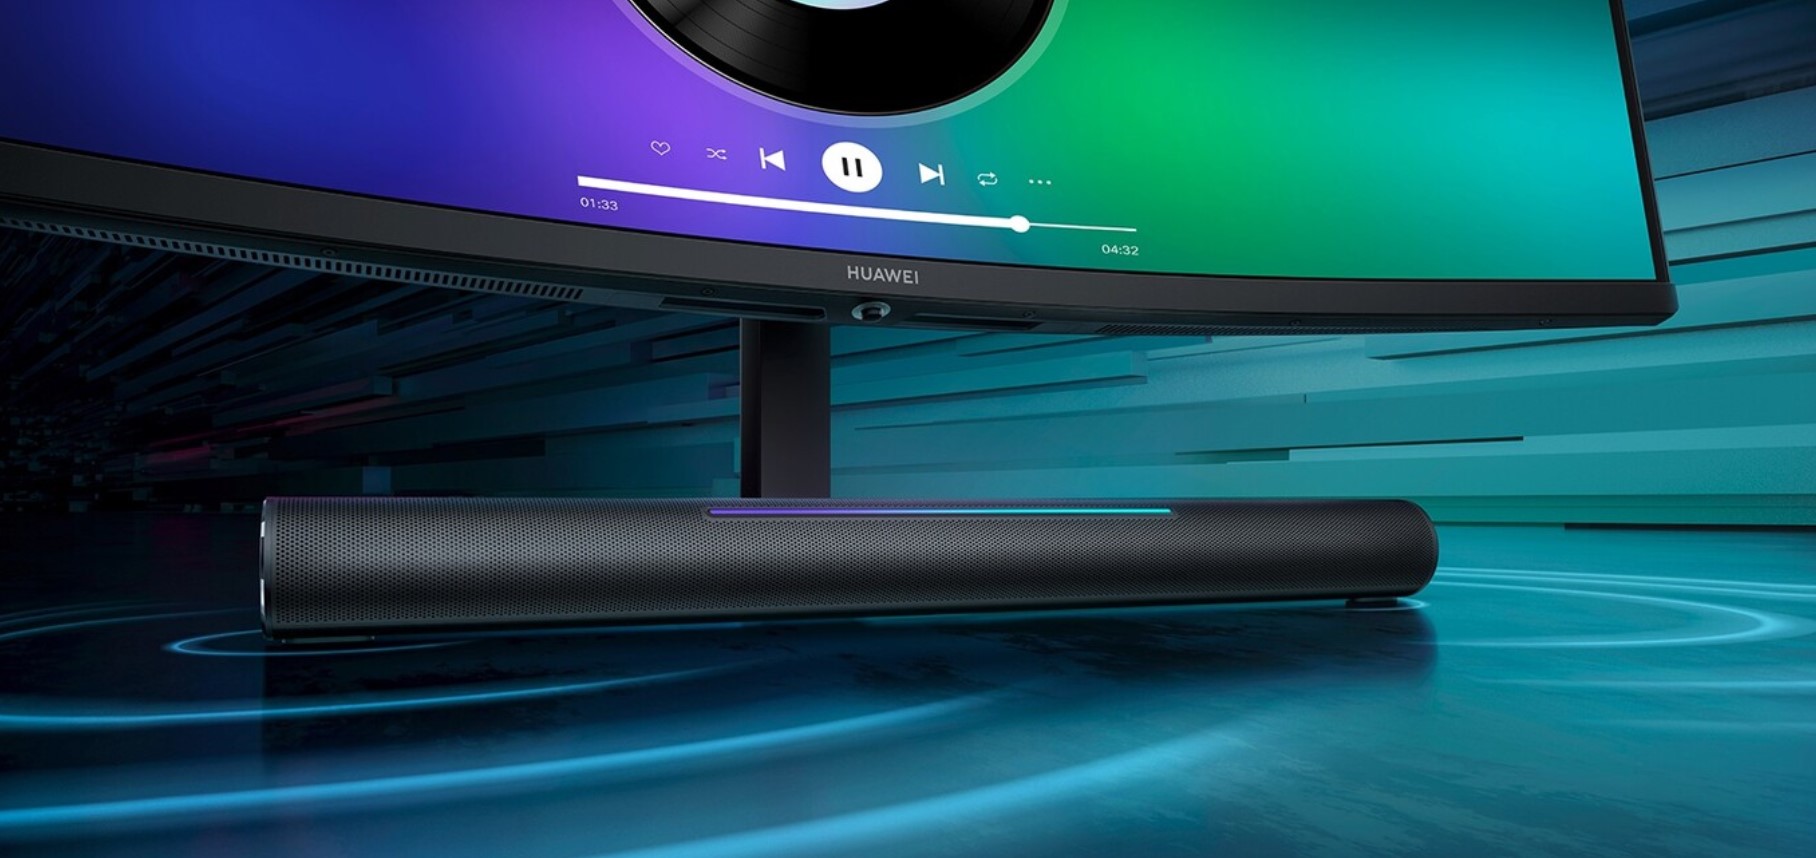 THE KEY DETAIL: THE SOUNDBAR IS INCLUDED, AND THE DOUBLE MICROPHONE IS TOO-1